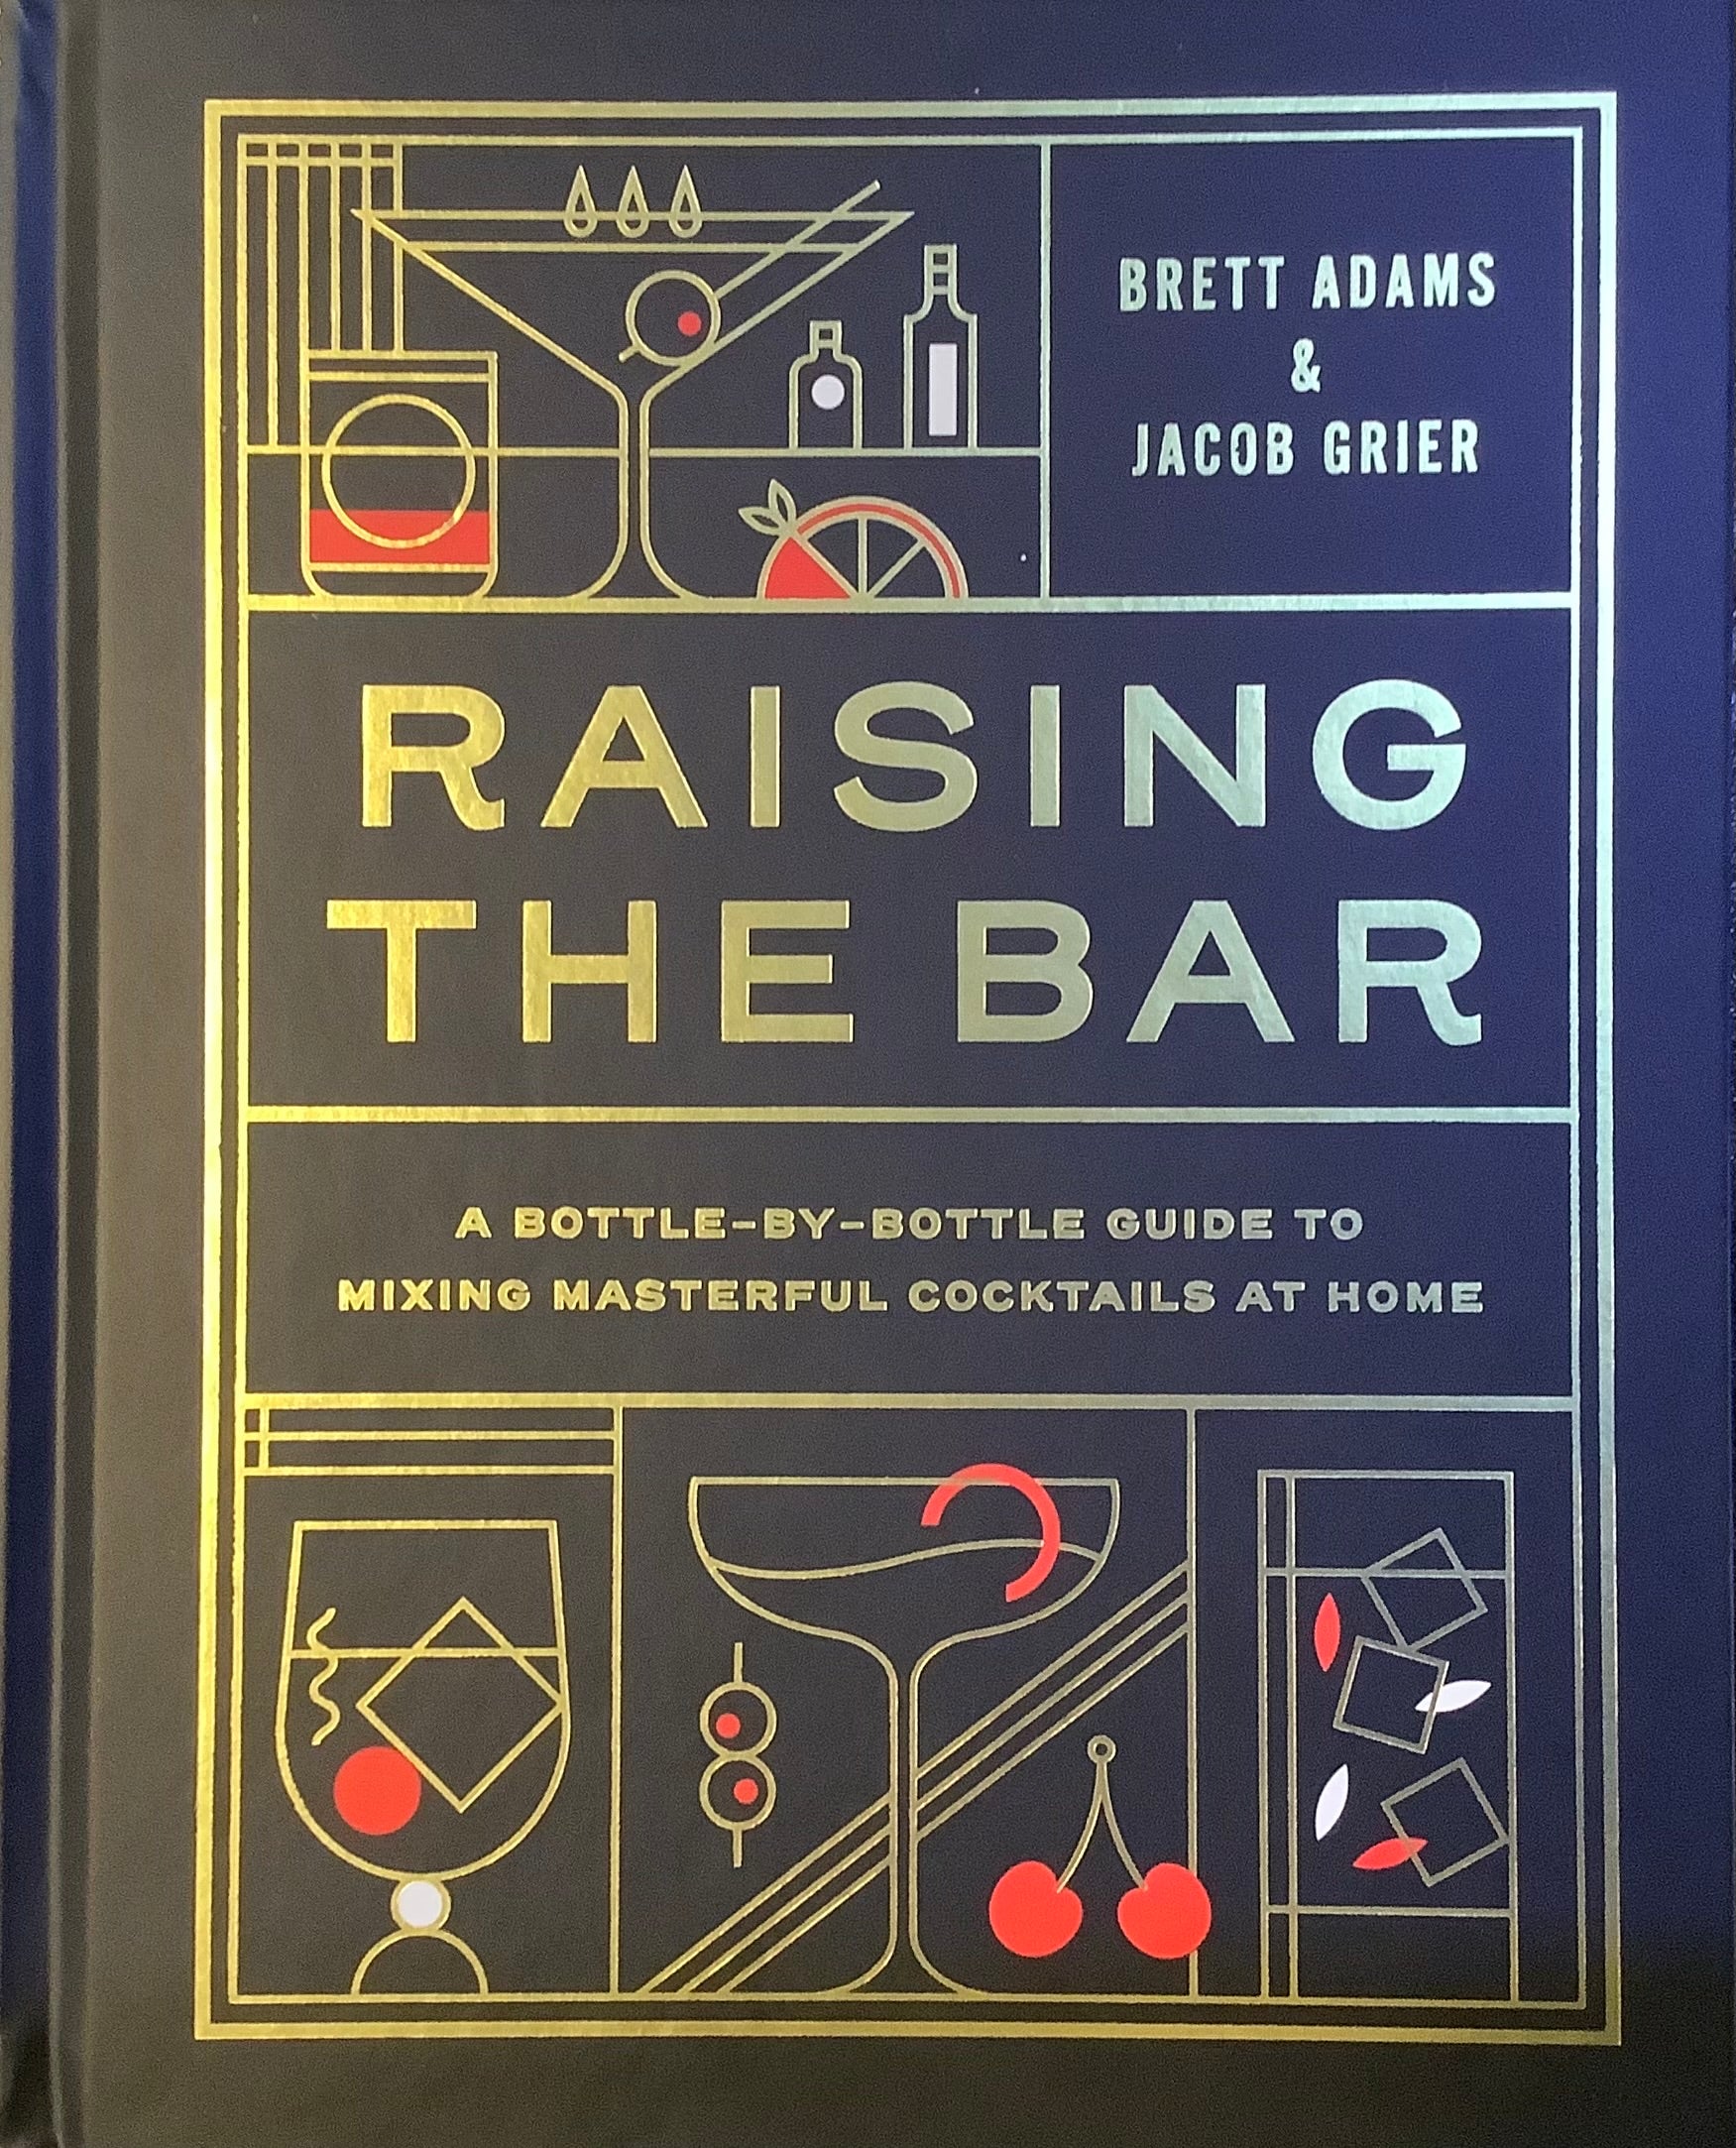 Raising the Bar: A Bottle-by-Bottle Guide to Mixing Up Masterful Cocktails at Home